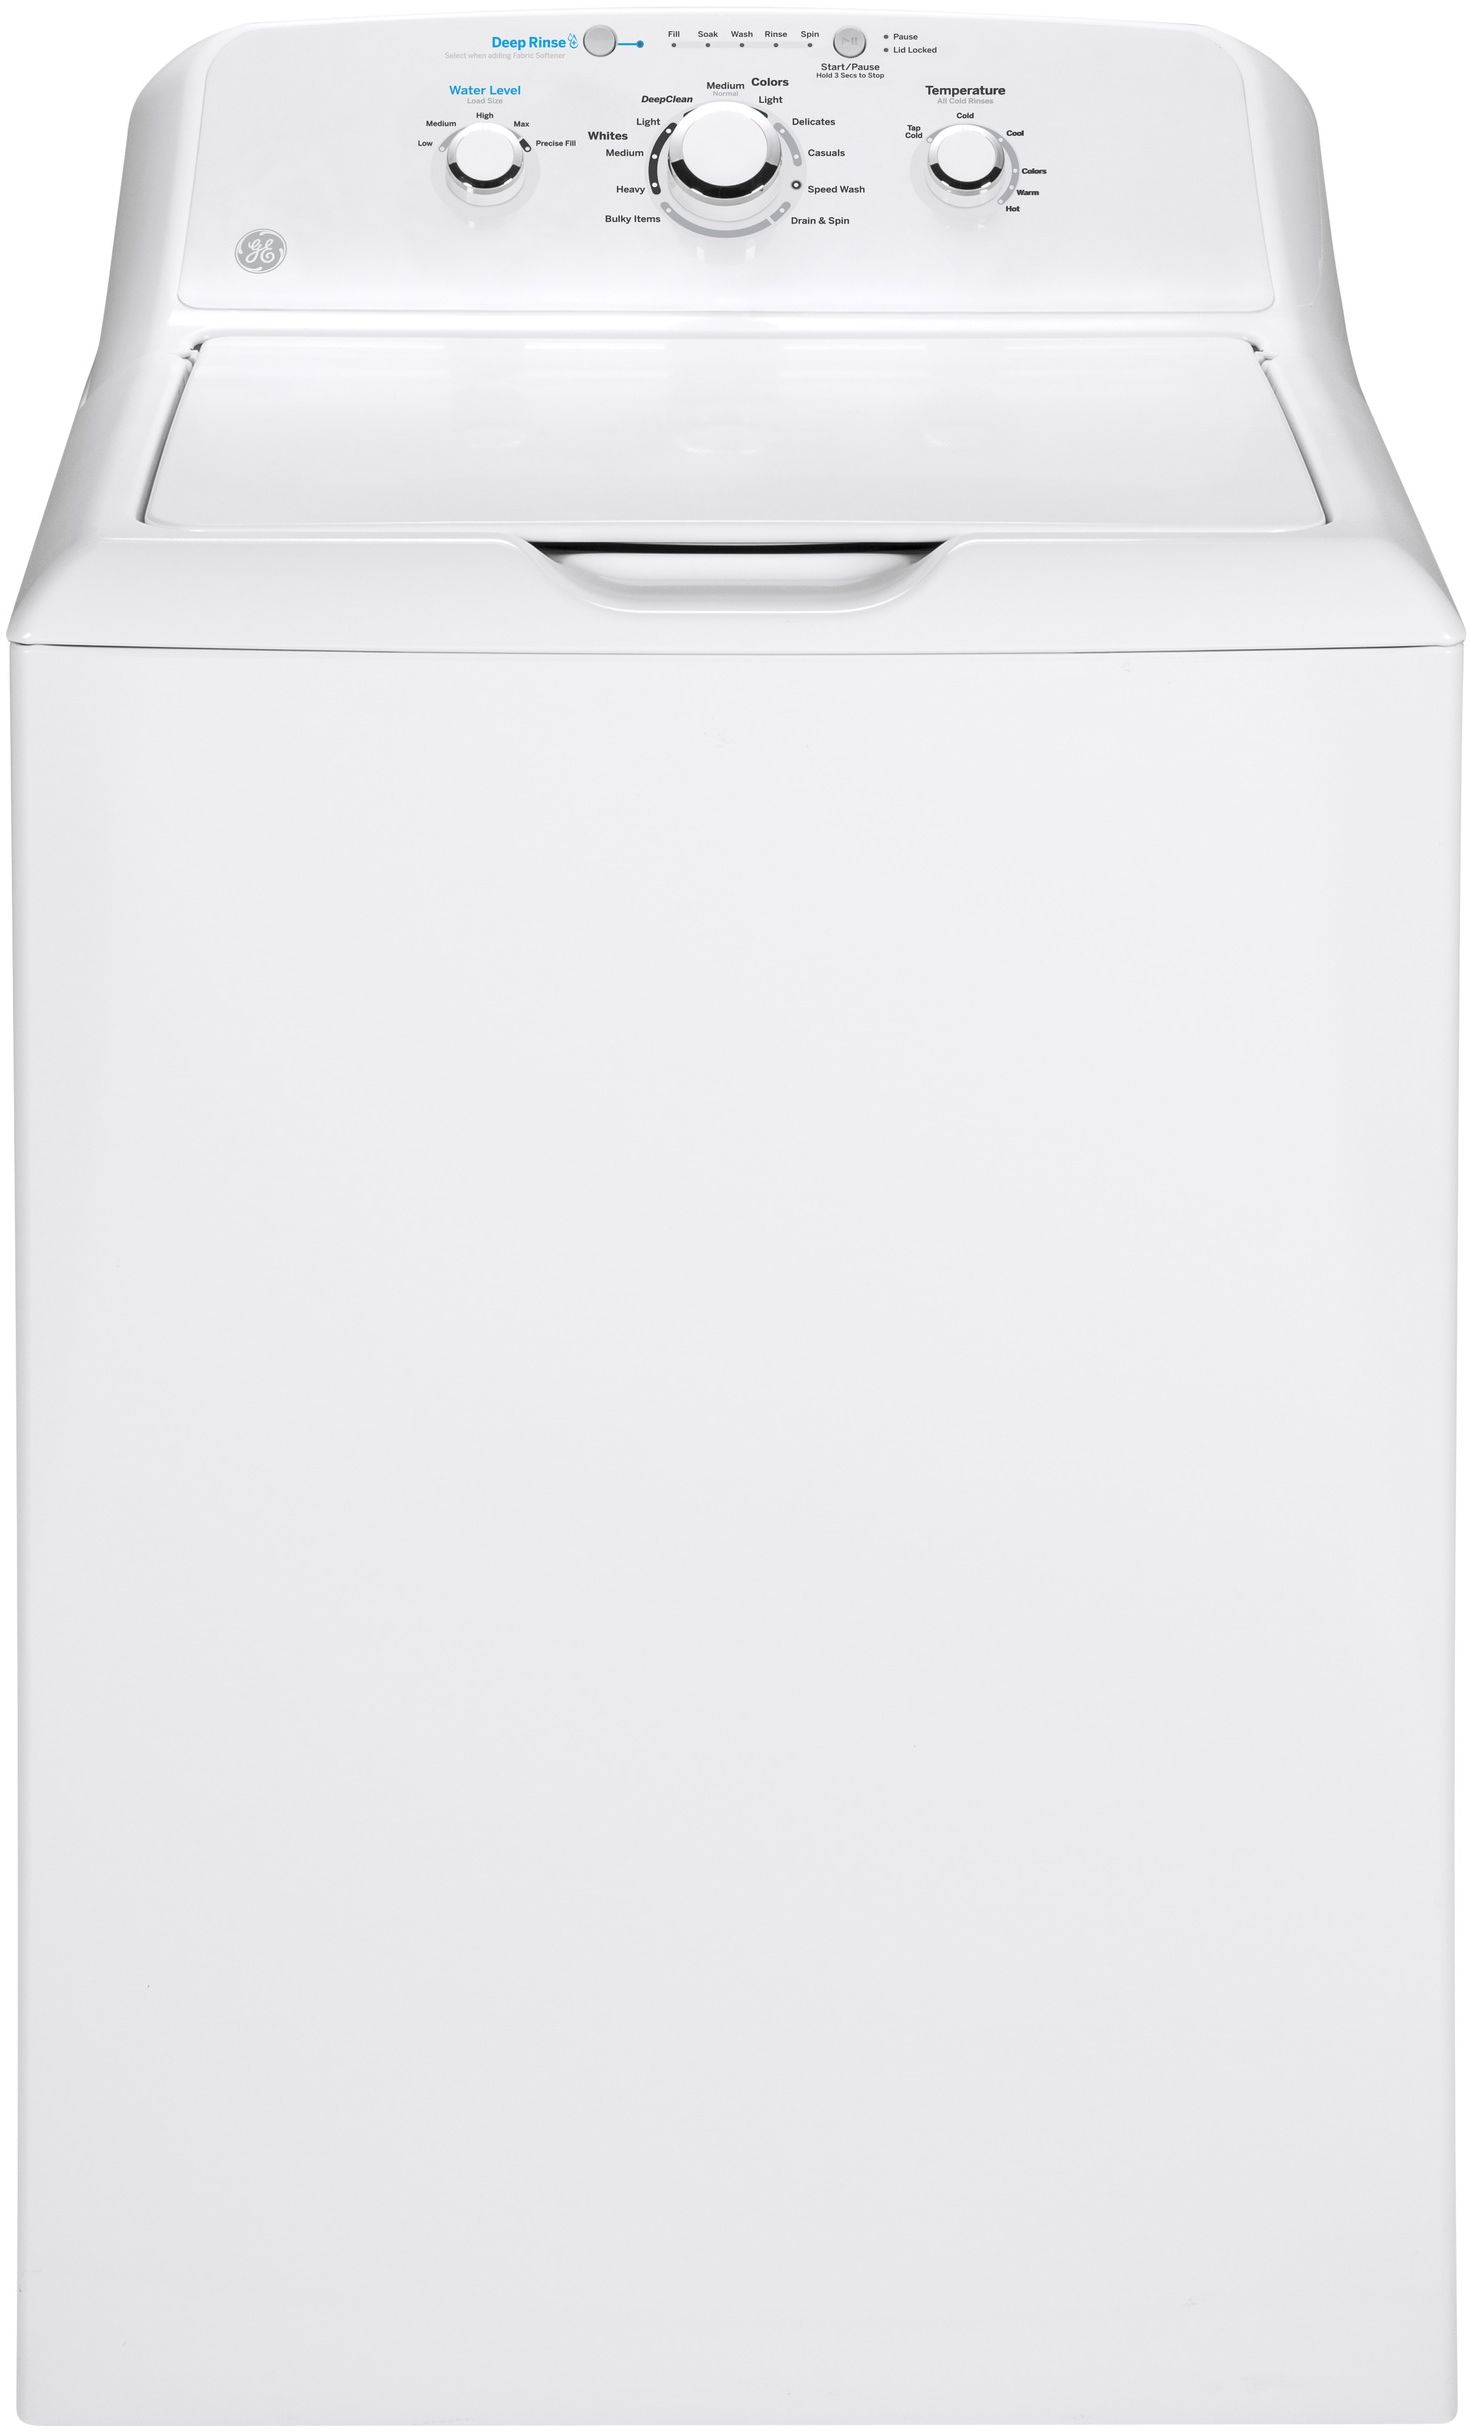 GE® 4.2 Cu. Ft. White Top Load Washer-GTW335ASNWW